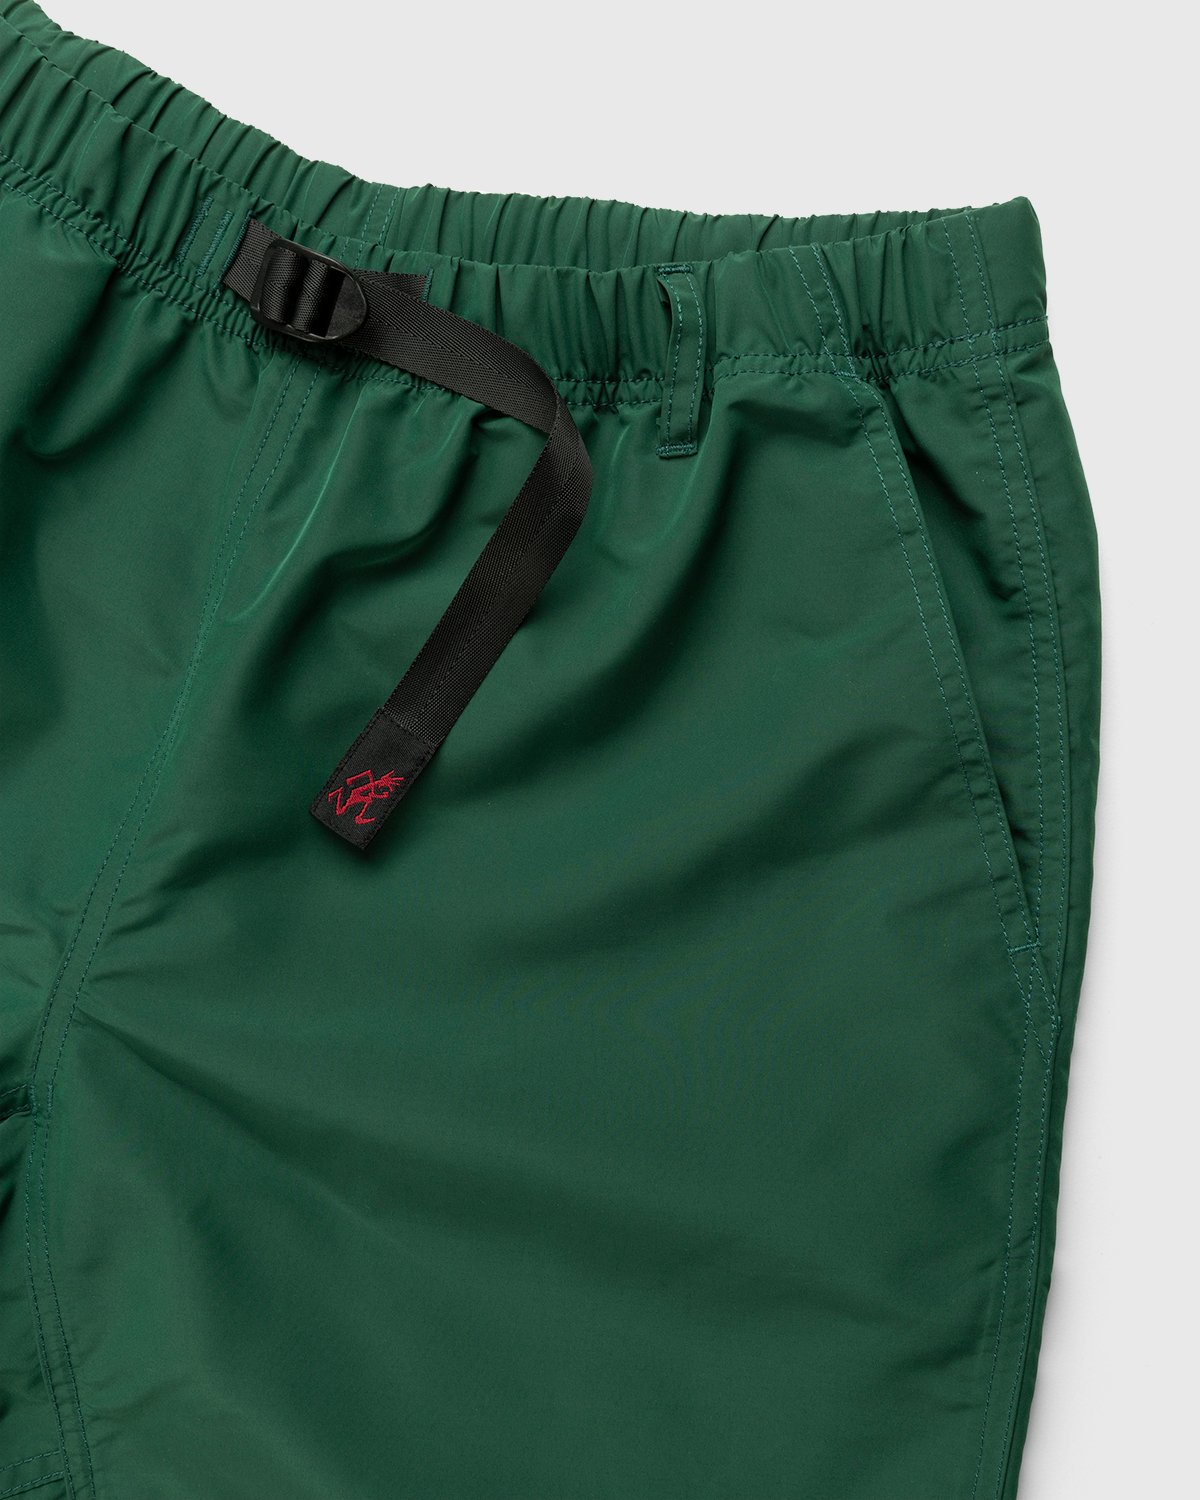 Gramicci x Highsnobiety - HS Sports Shell Packable Shorts Forest Green - Clothing - Green - Image 3